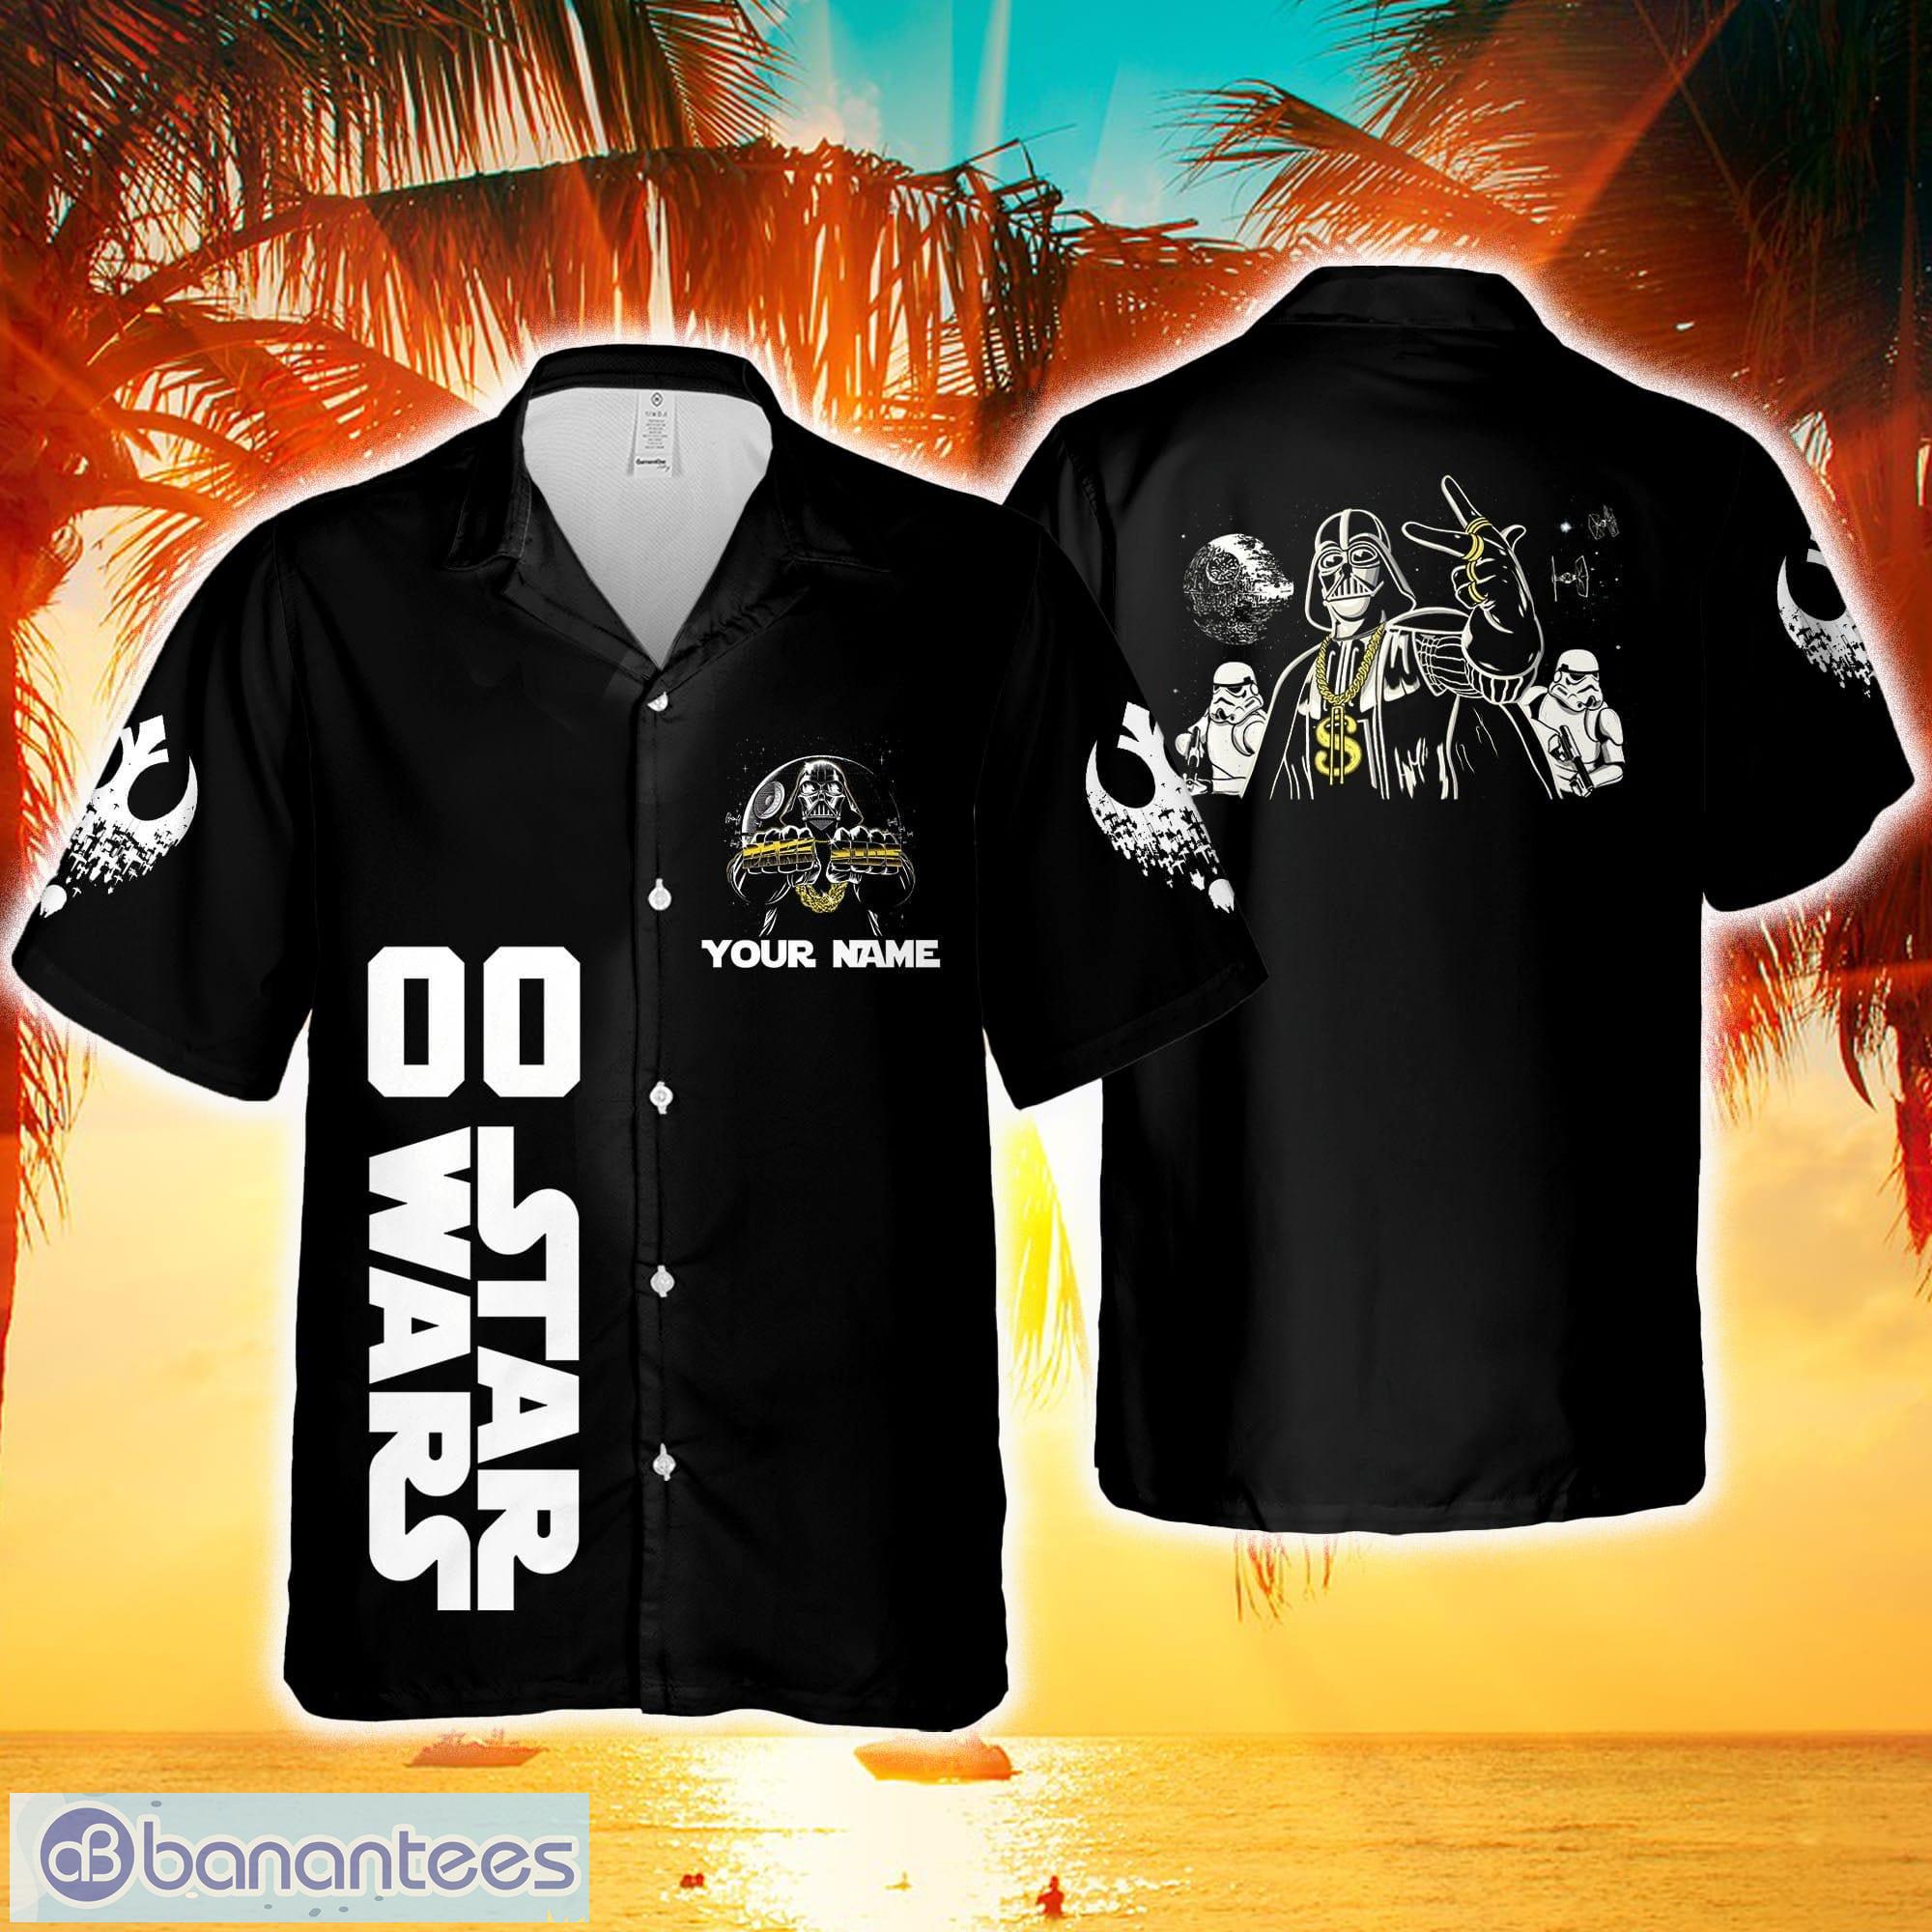  Engraved Star Wars Gifts for Men - Personalized Star